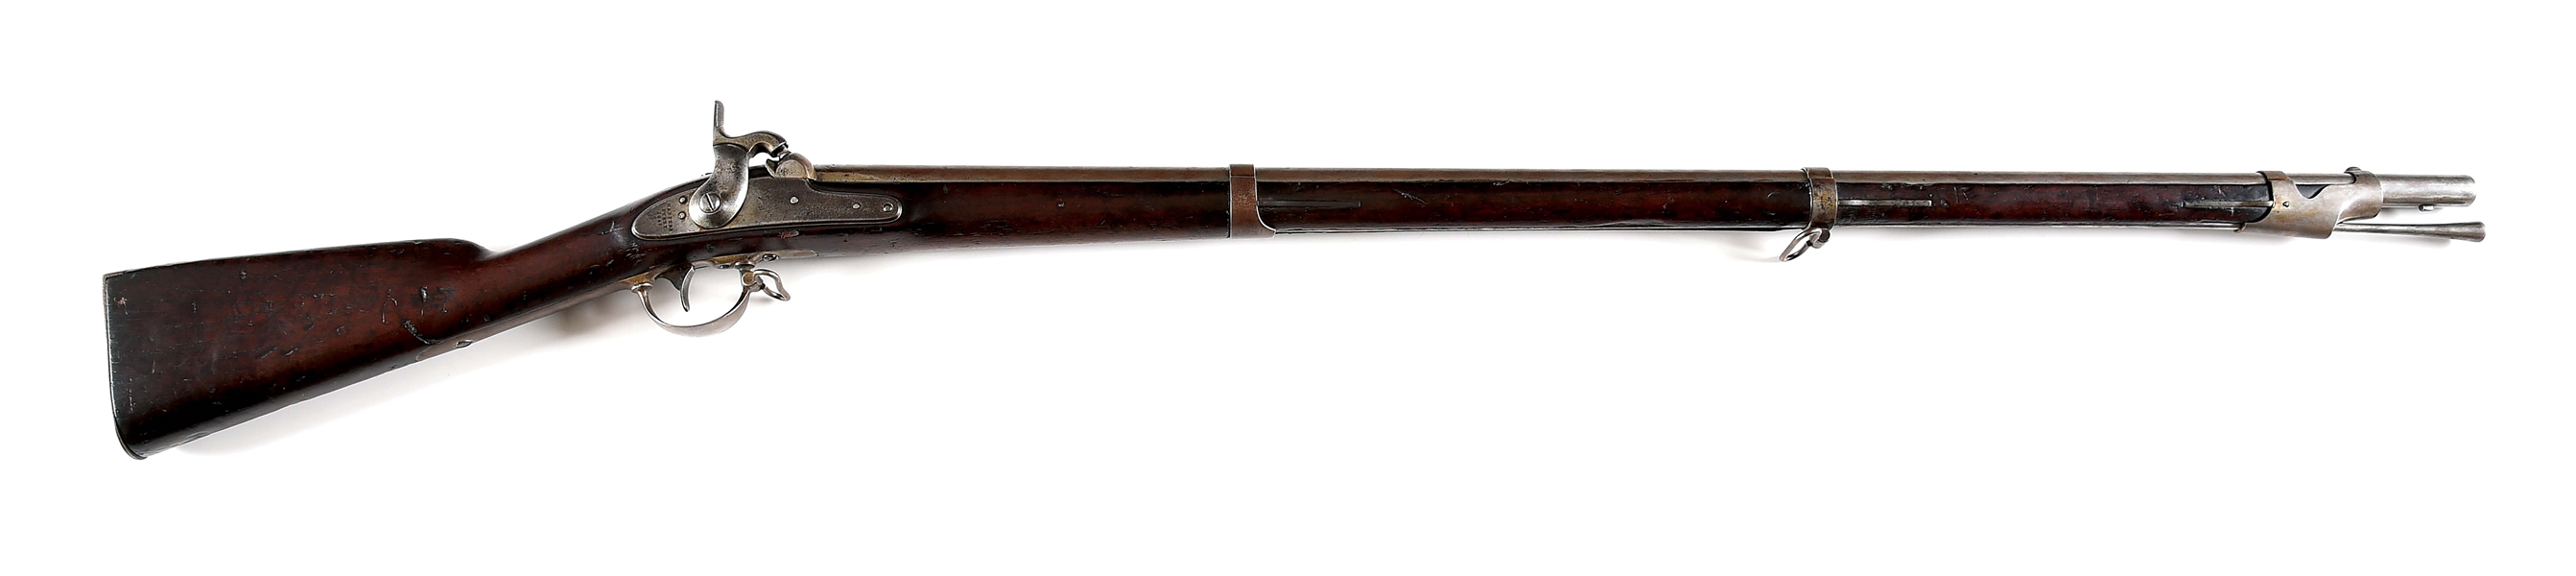 (A) HARPERS FERRY US M1842 PERCUSSION RIFLED MUSKET DATED 1848.